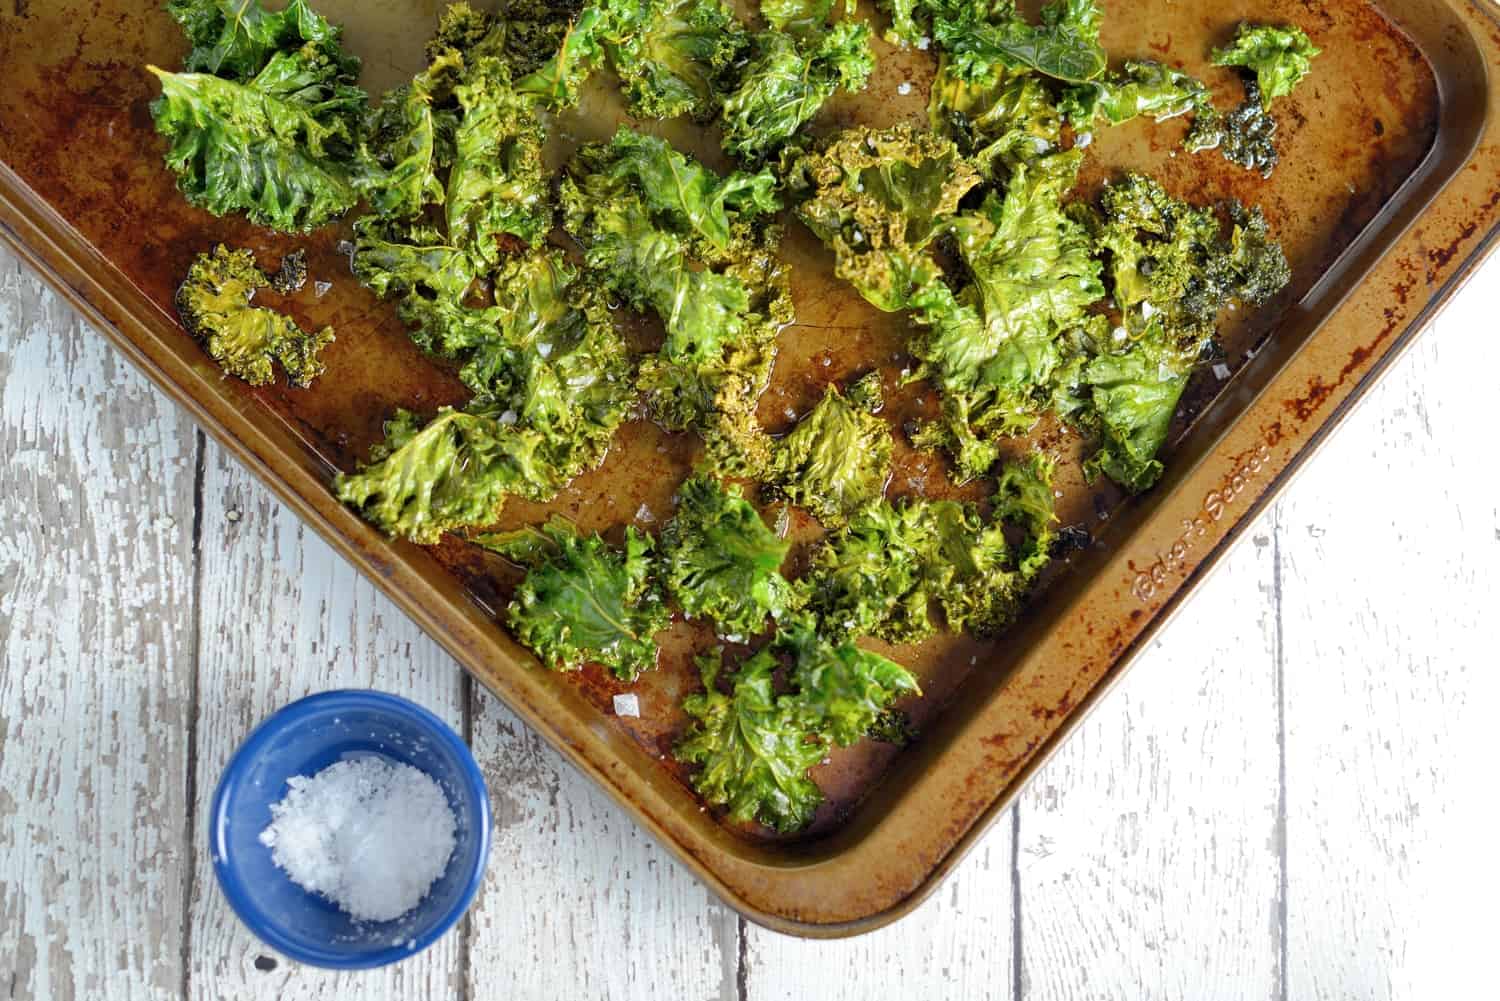 All you need for this Kale Chips recipe is kale leaves, olive oil, and sea salt! A tasty, easy, and healthy alternative to potato chips! #kalechipsrecipe #bakedkalechips www.savoryexperiments.com 